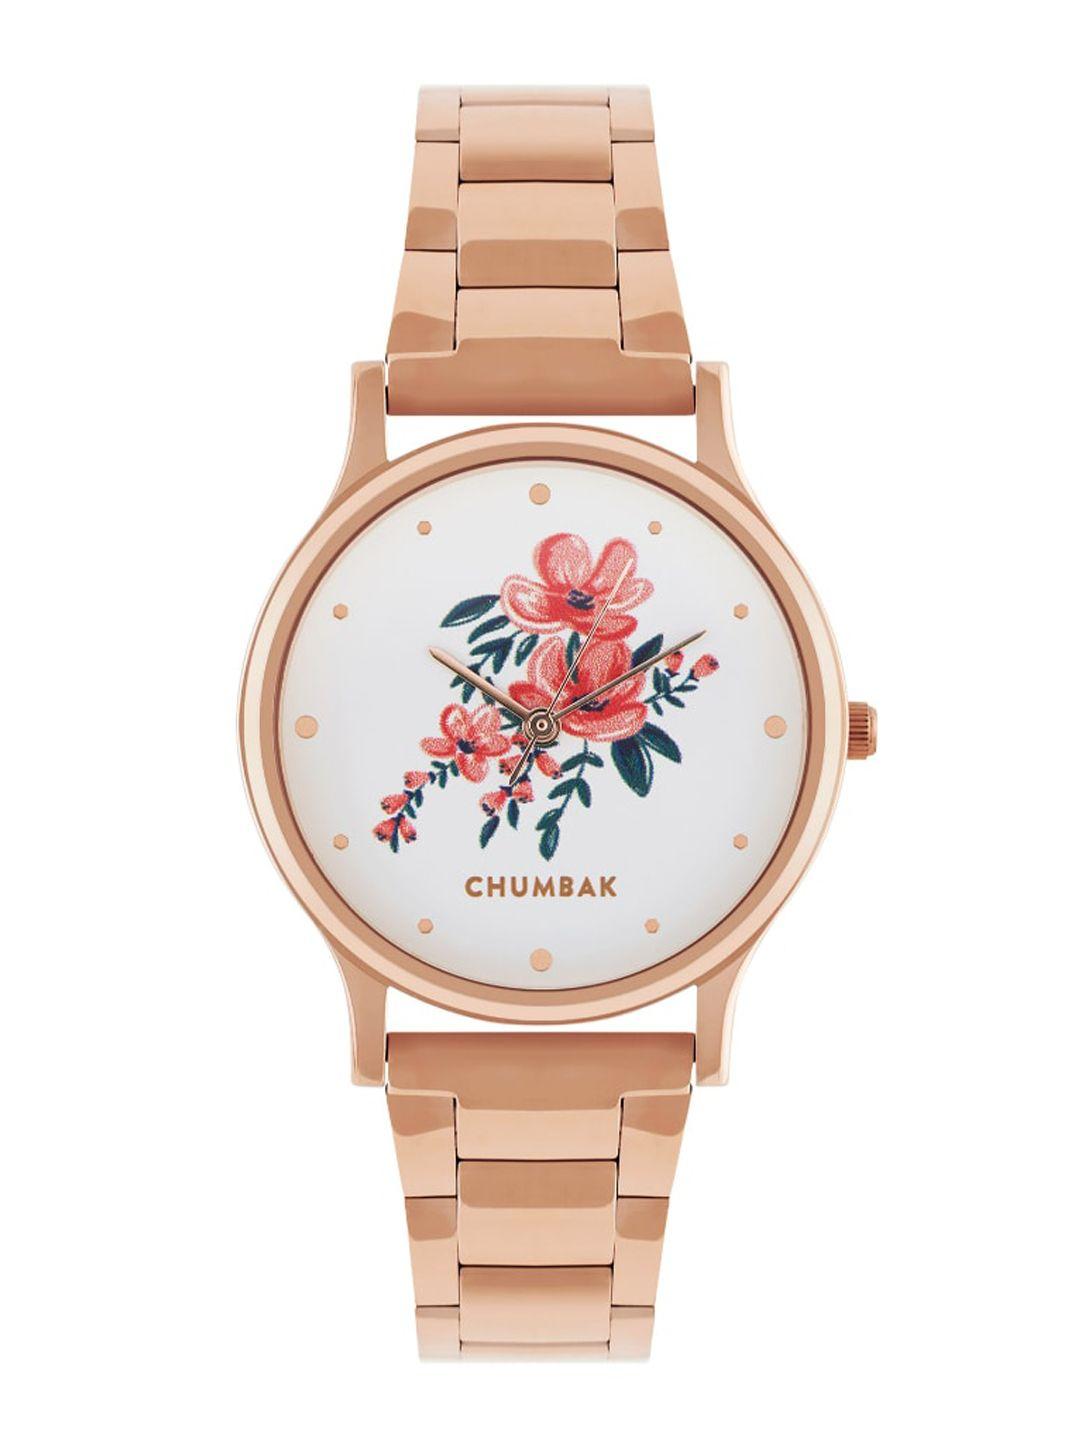 teal-by-chumbak-women-white-printed-dial-&-rose-gold-plated-bracelet-style-straps-analogue-watch